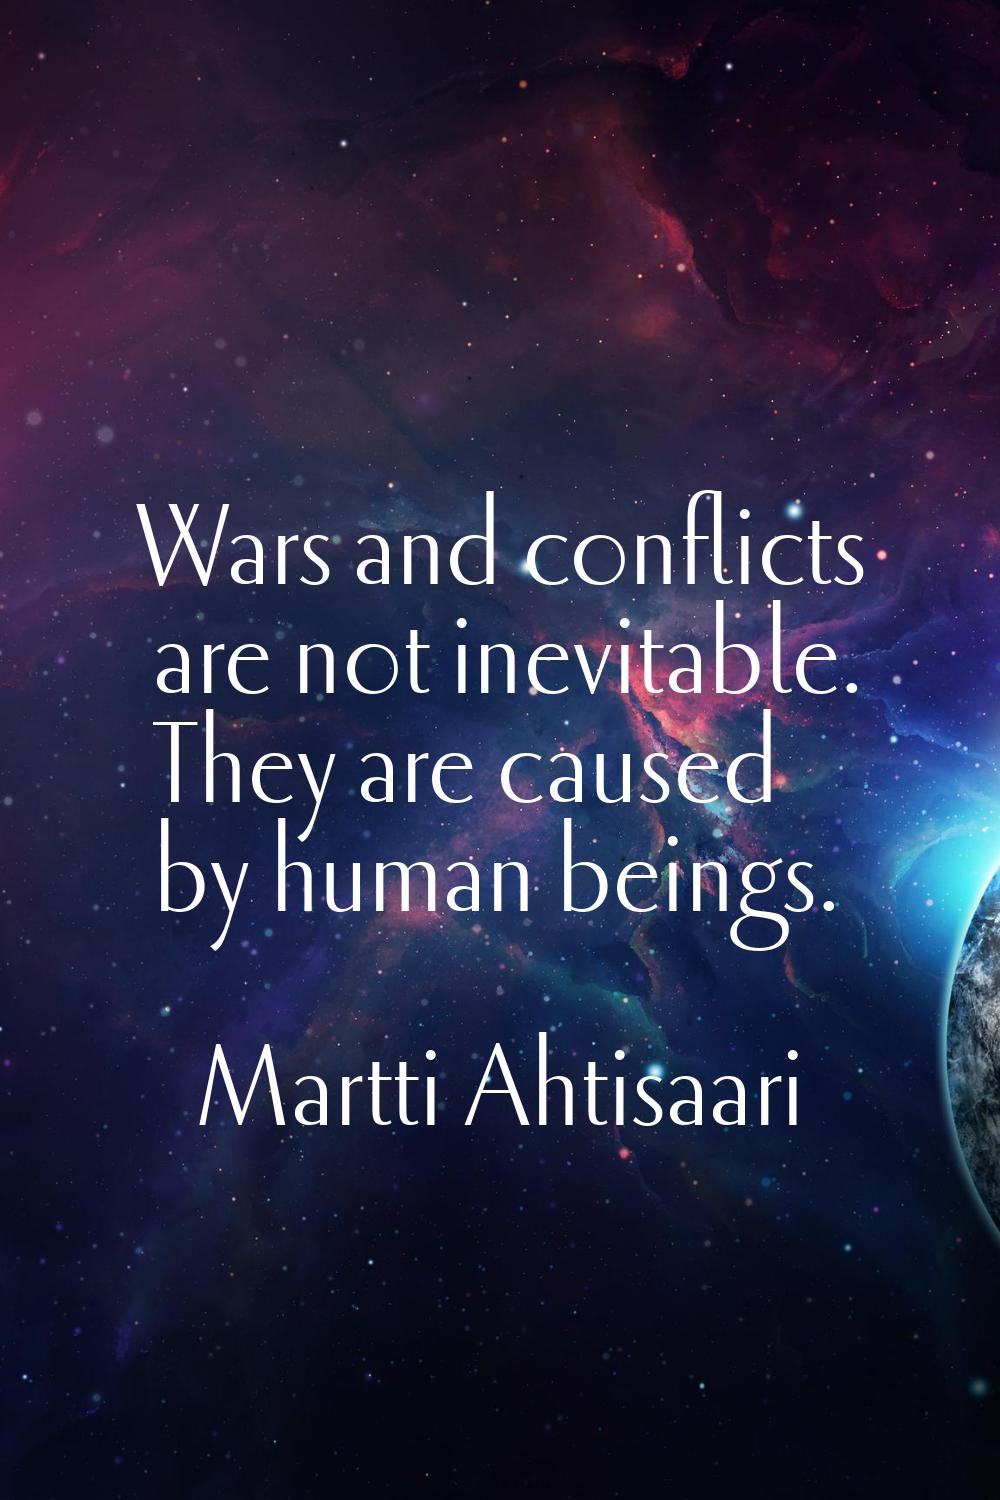 Wars and conflicts are not inevitable. They are caused by human beings.